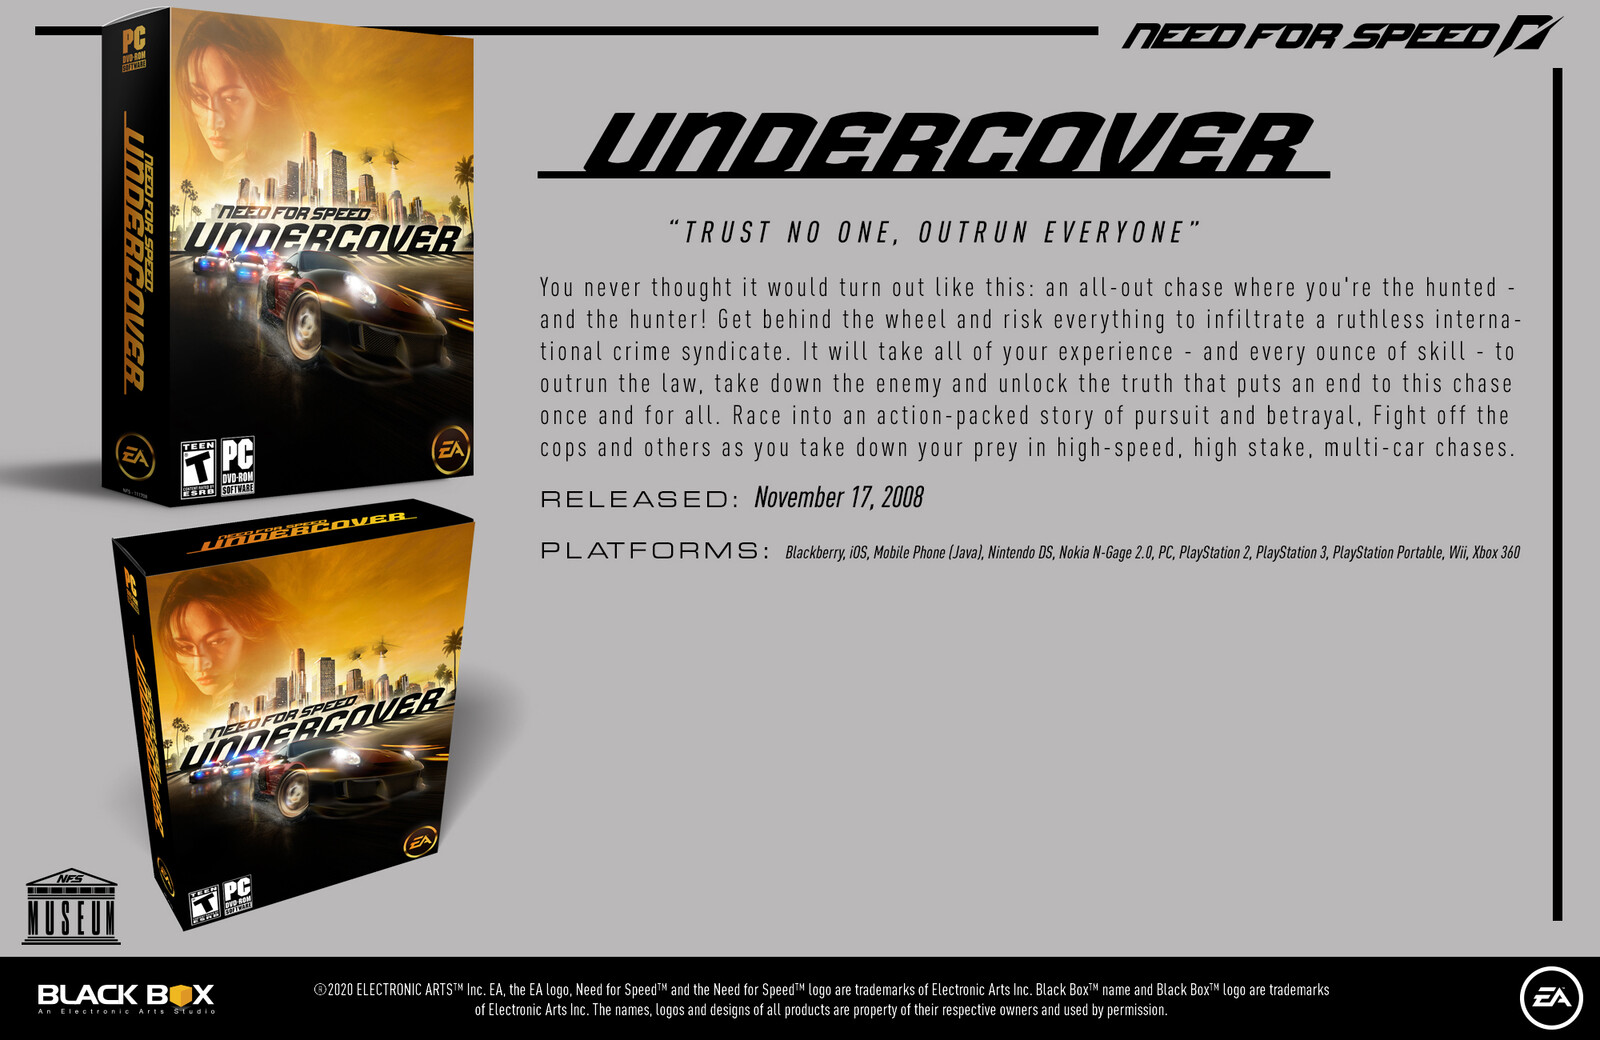 Need for Speed: Undercover (2008) - Museum Slide